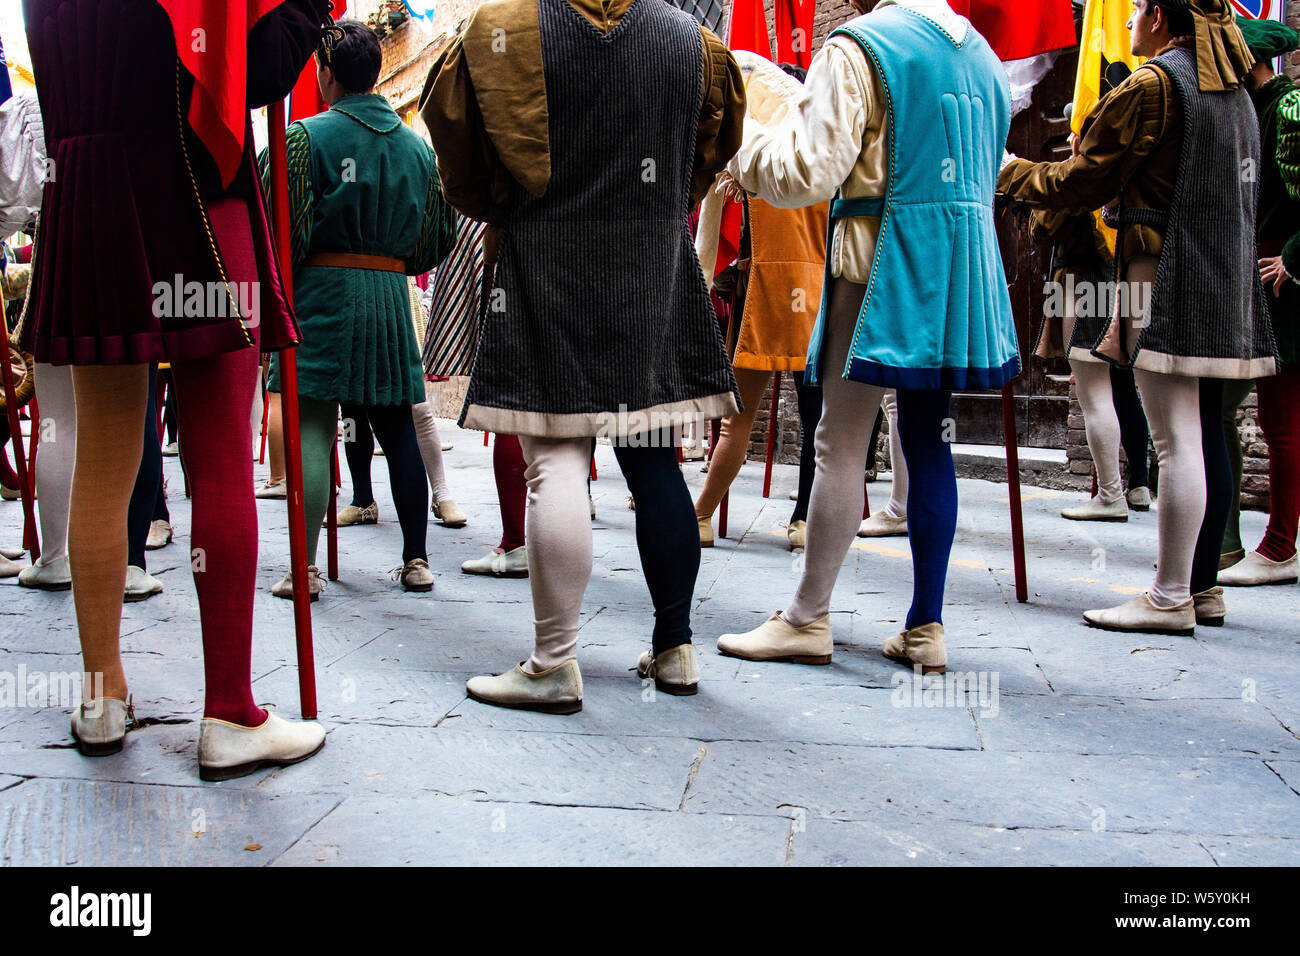 Men in medieval tights and costumes get ready to participate in the annual Palio parade in Siena, Italy Stock Photo